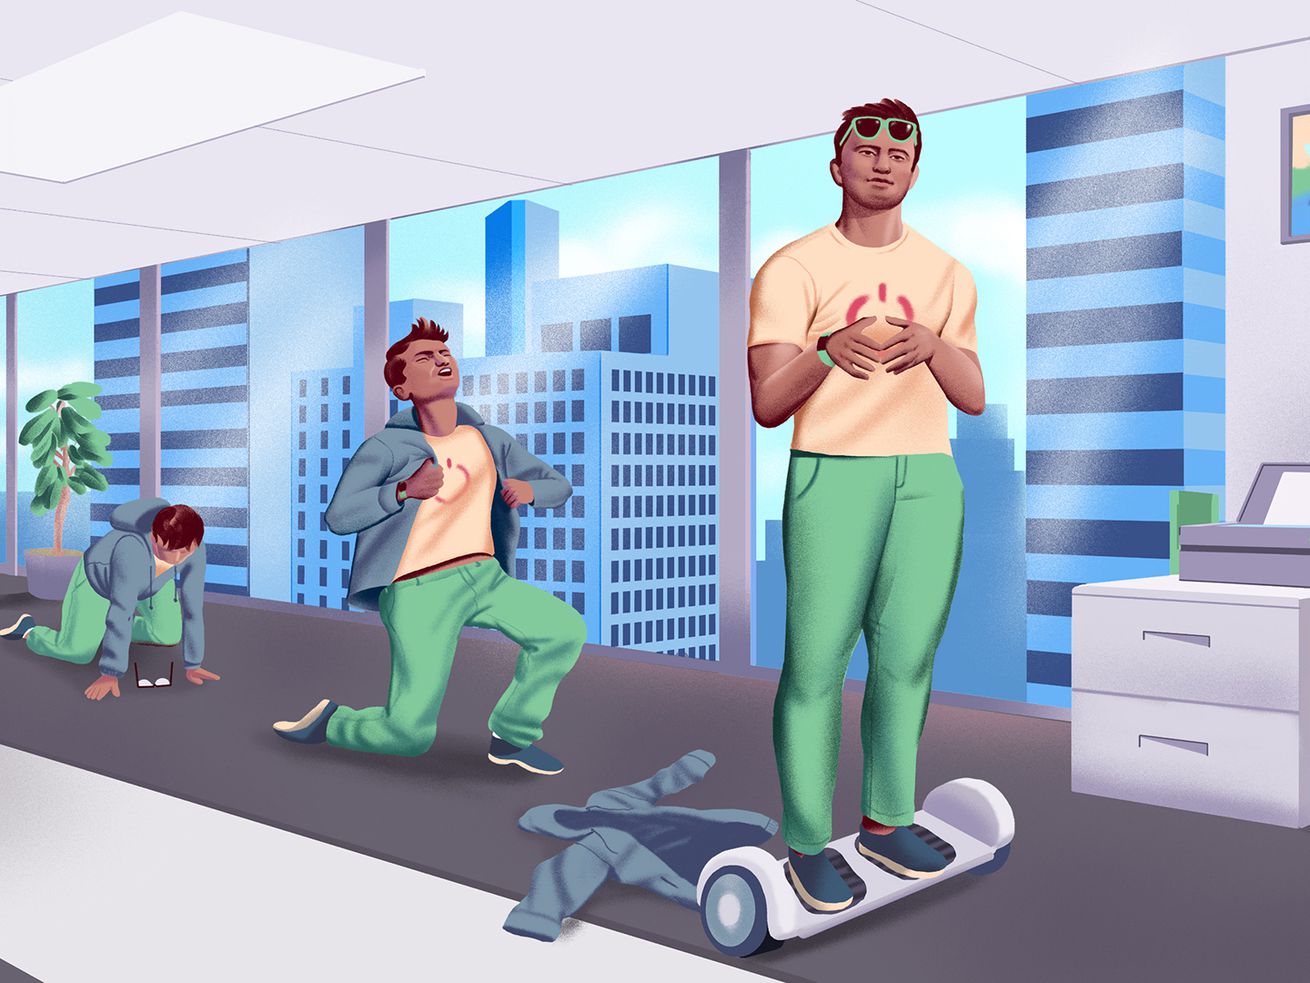 Digital illustration depicting the evolution of a man in a zip-up hoodie from sitting at a desk in front of a computer, to crawling, to lunging, to standing up straight on a hoverboard, appearing buff and muscular, with his zip-up hoodie discarded on the ground. This takes place in an office building with a glass wall overlooking skyscrapers.